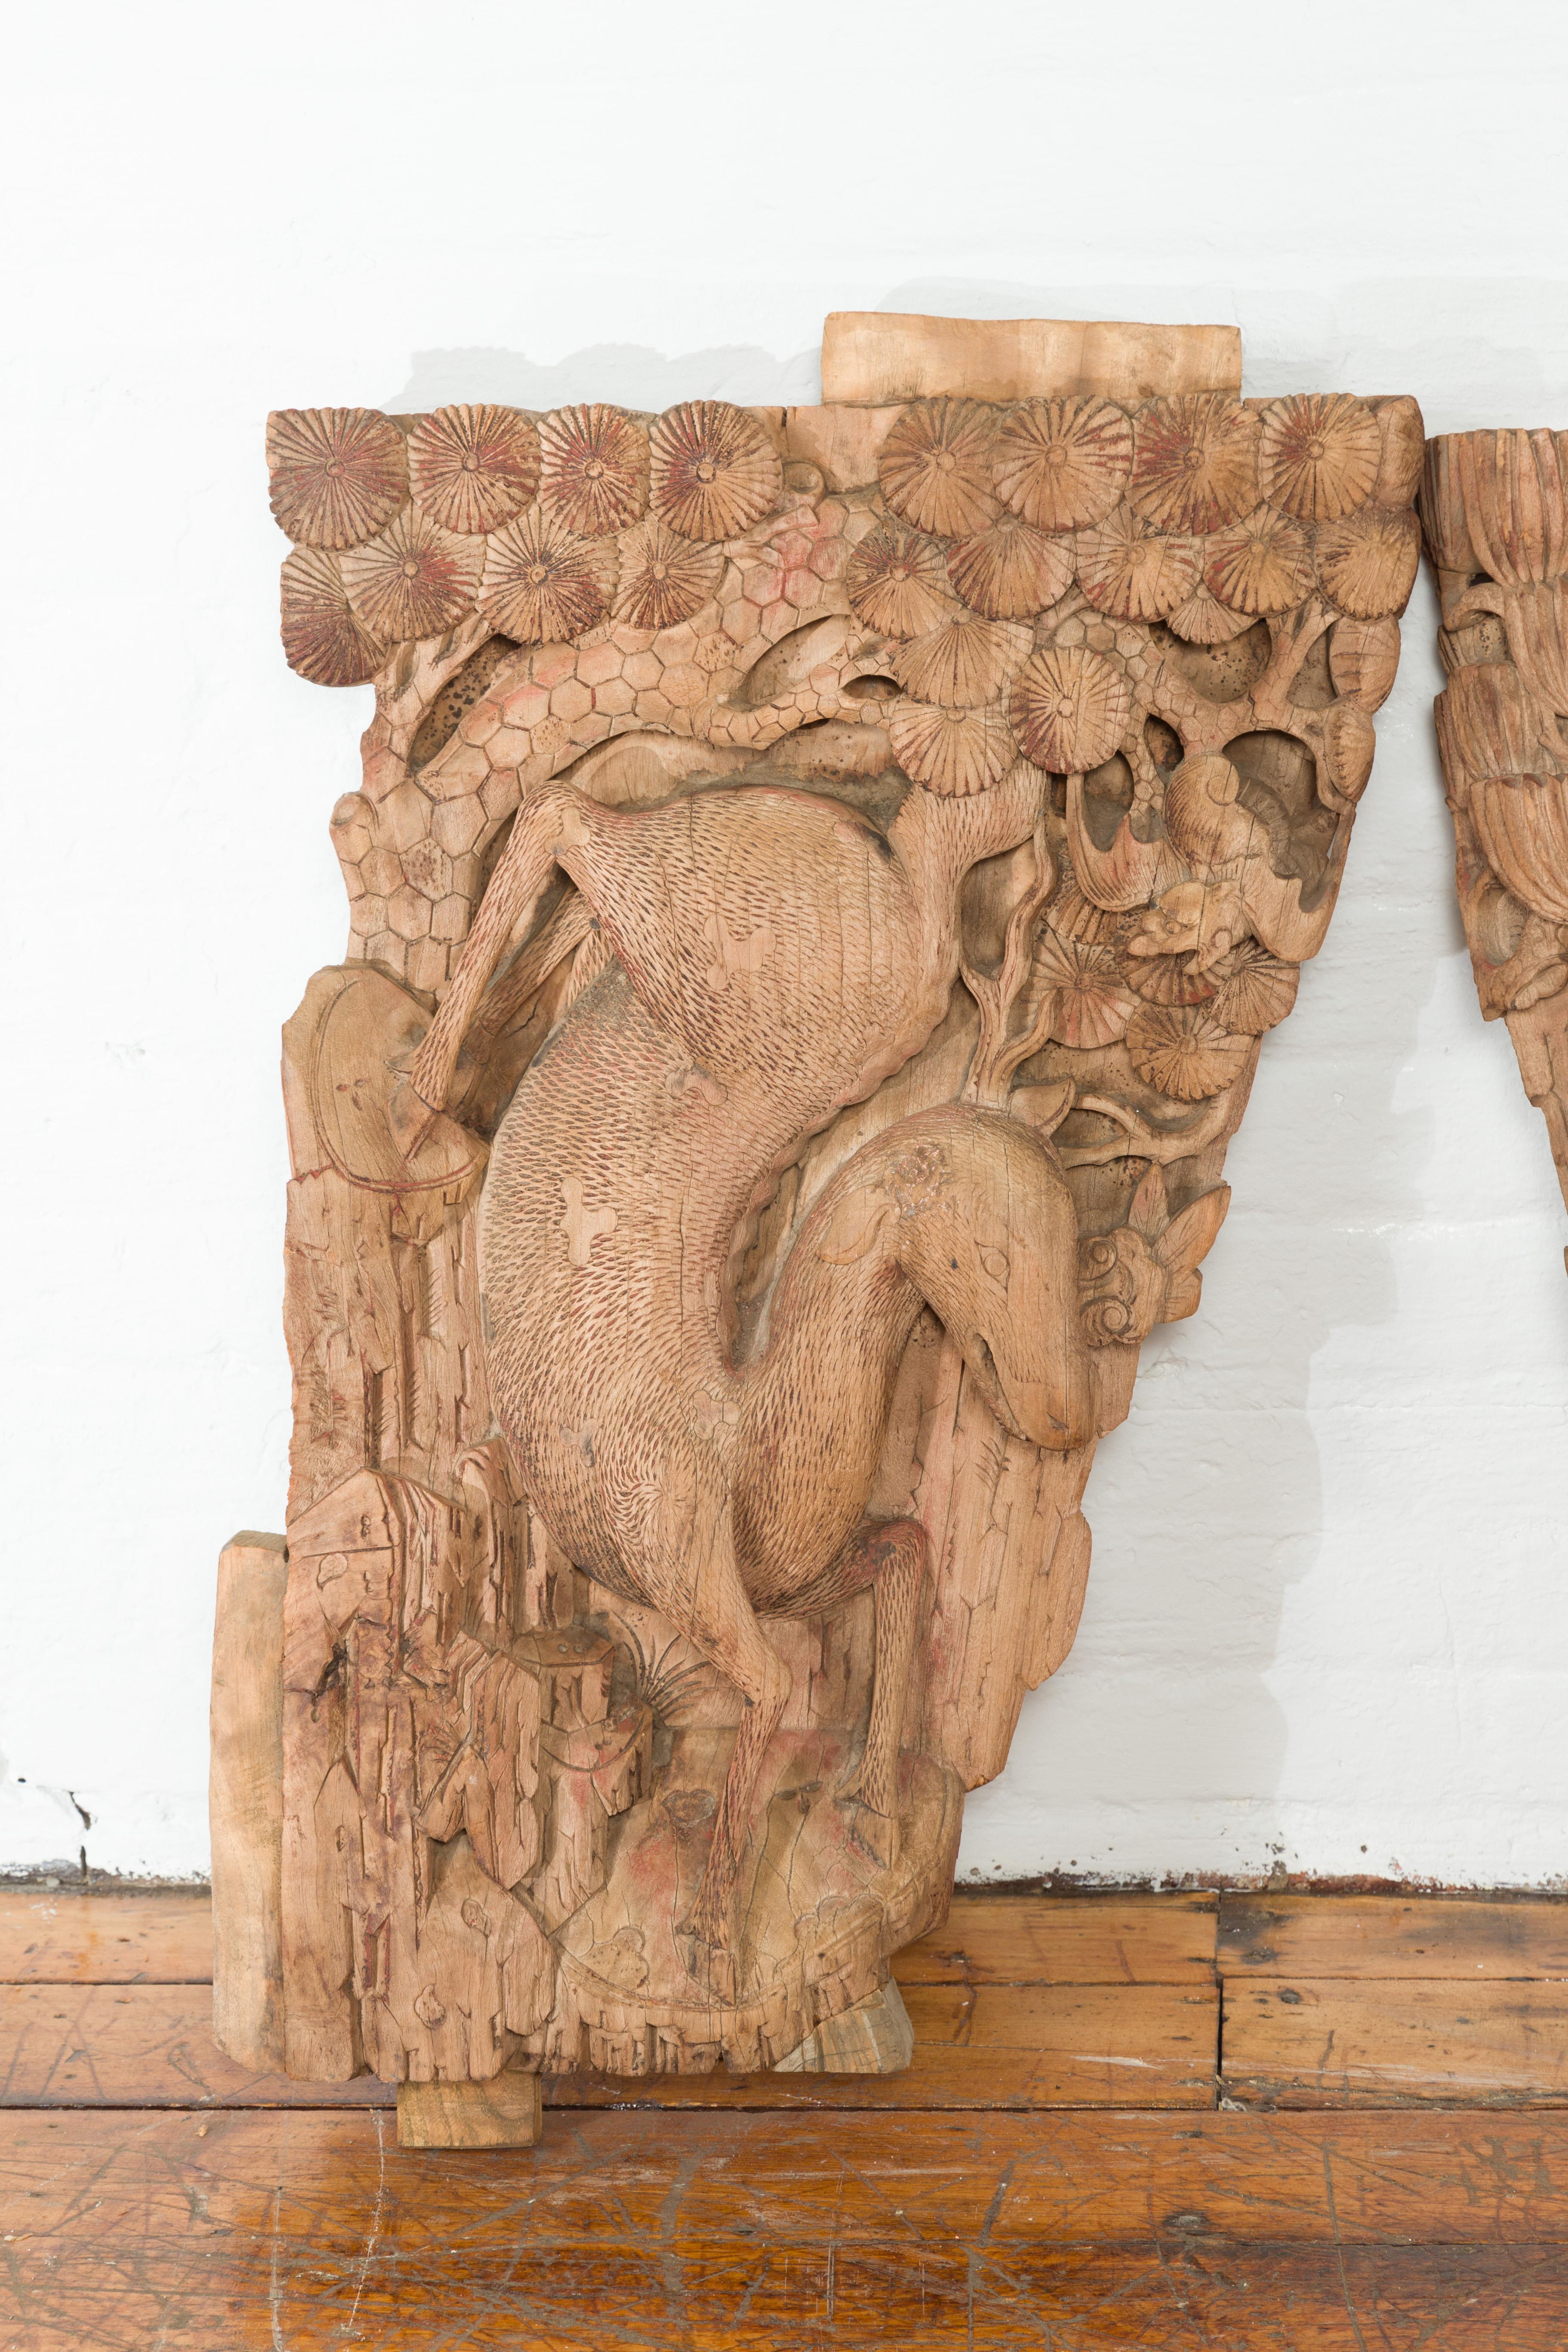 A pair of Chinese Qing Dynasty hand-carved wooden temple corbels from the 18th or 19th century with deer and their young. Originally part of a temple wall, this pair of Chinese corbels from the Qing Dynasty (or earlier), features two deer facing one